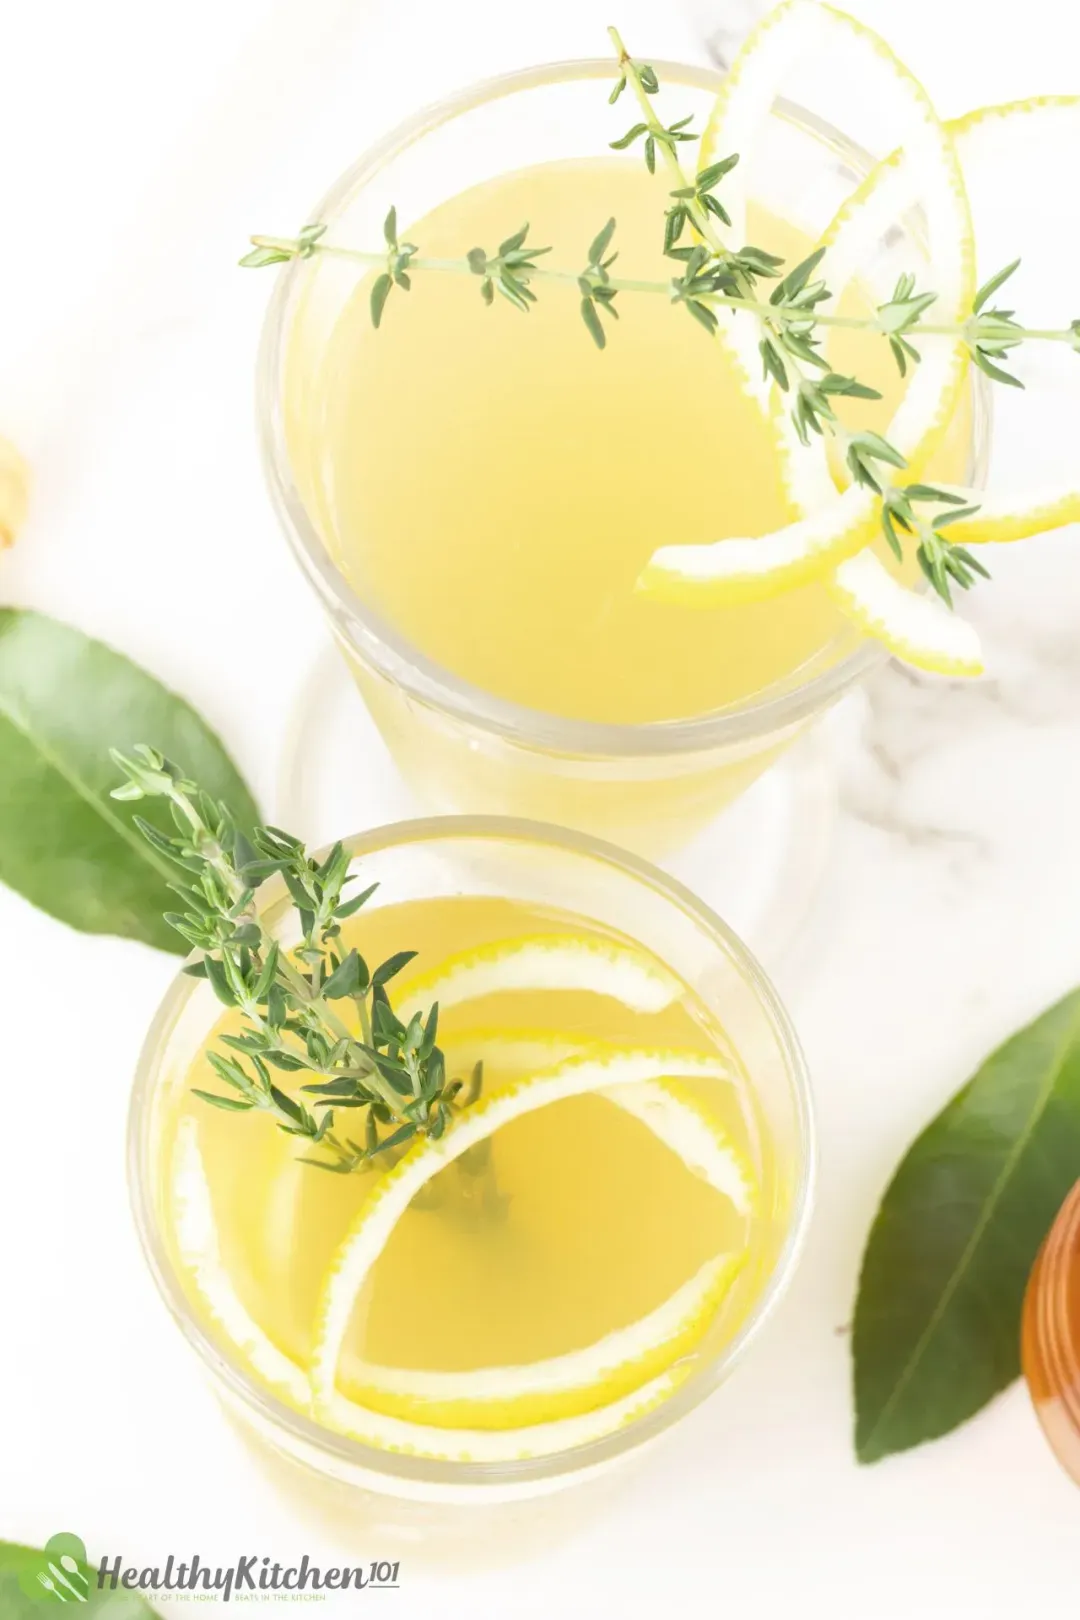 A shot taken from the top of two lemonade glasses garnished with lemon peels, thyme, and lemon leaves